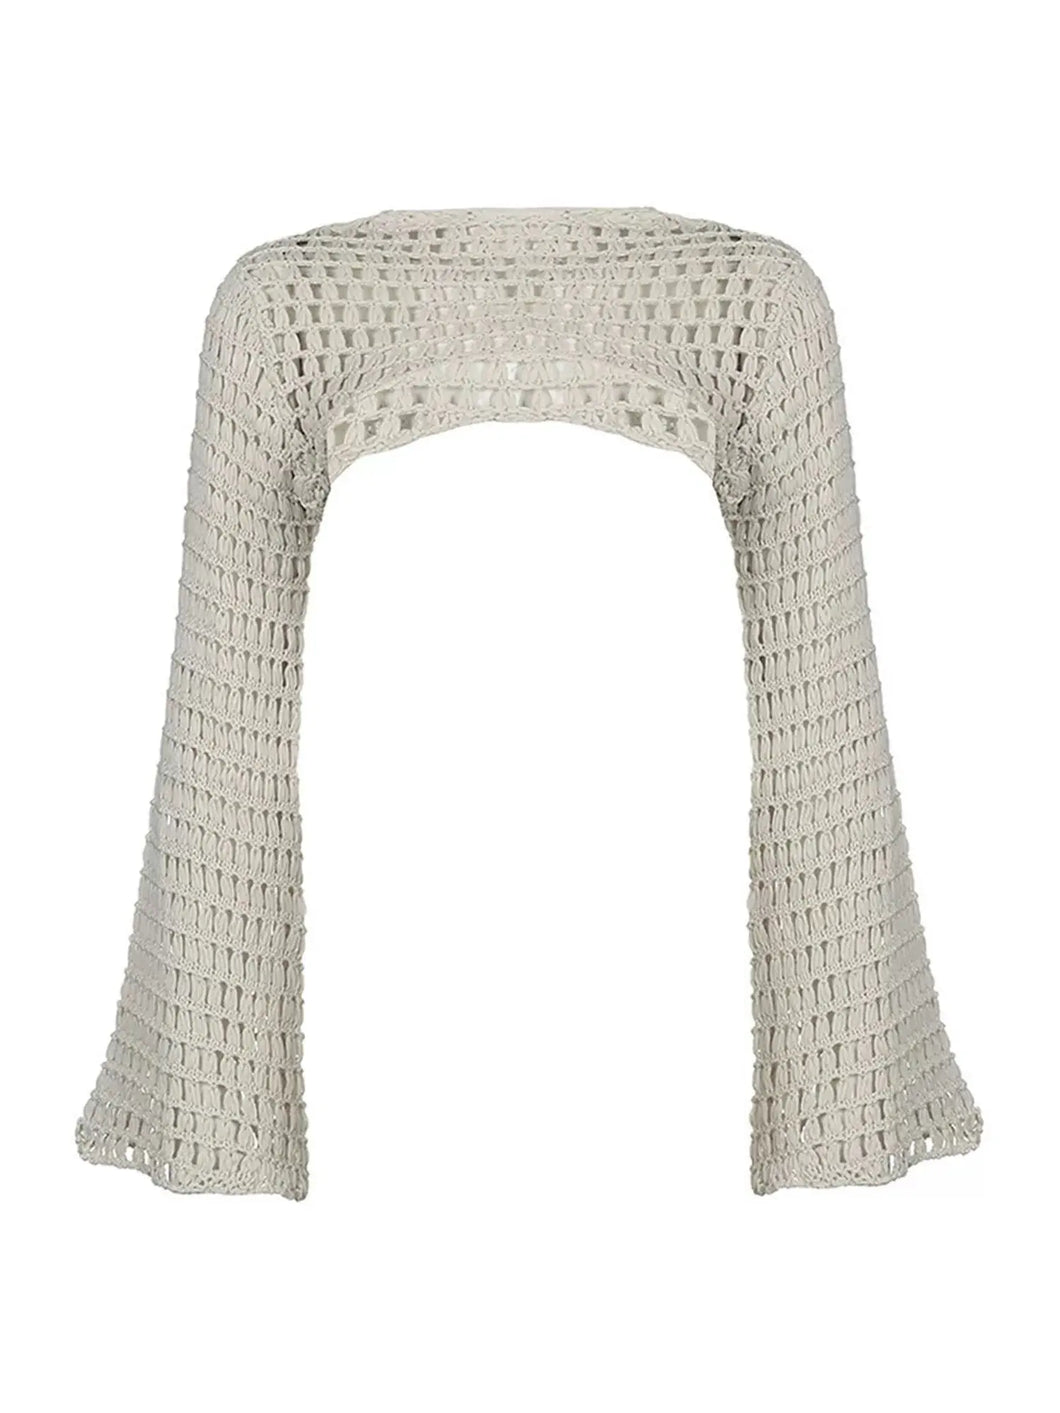 ‘Snooze’ Fishnet Cutout Ripped Knitted Blouse AlielNosirrah